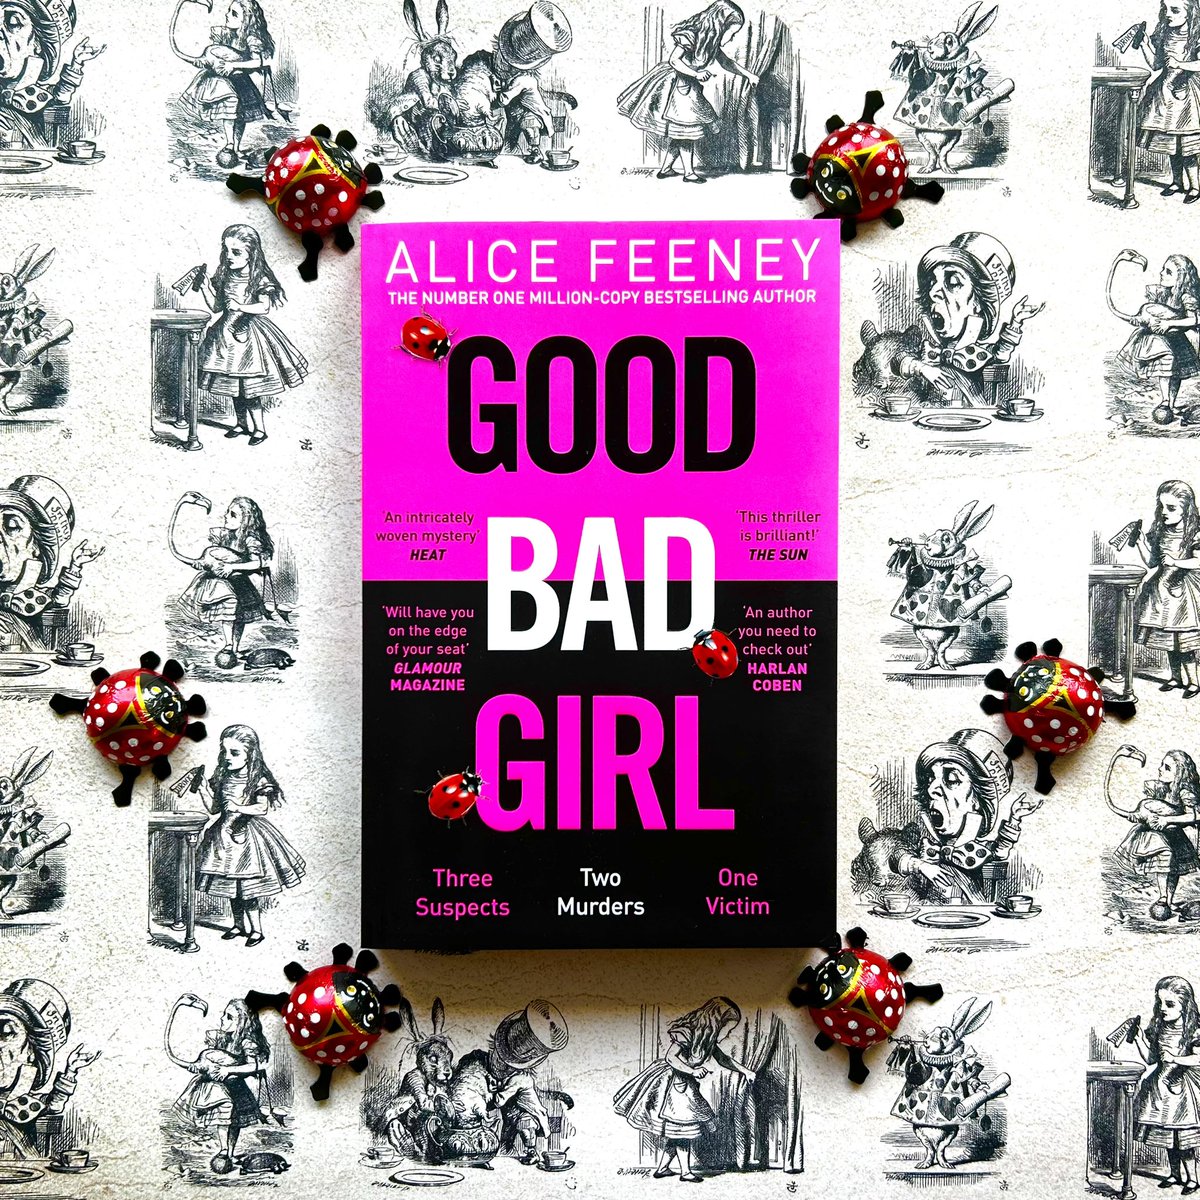 GOOD BAD GIRL arrives in paperback in the UK in just 10 days’ time and with a brand new cover. Huge thanks to all the lovely readers who have pre ordered a copy. Links in my bio if you might like to. Thank you and happy reading!